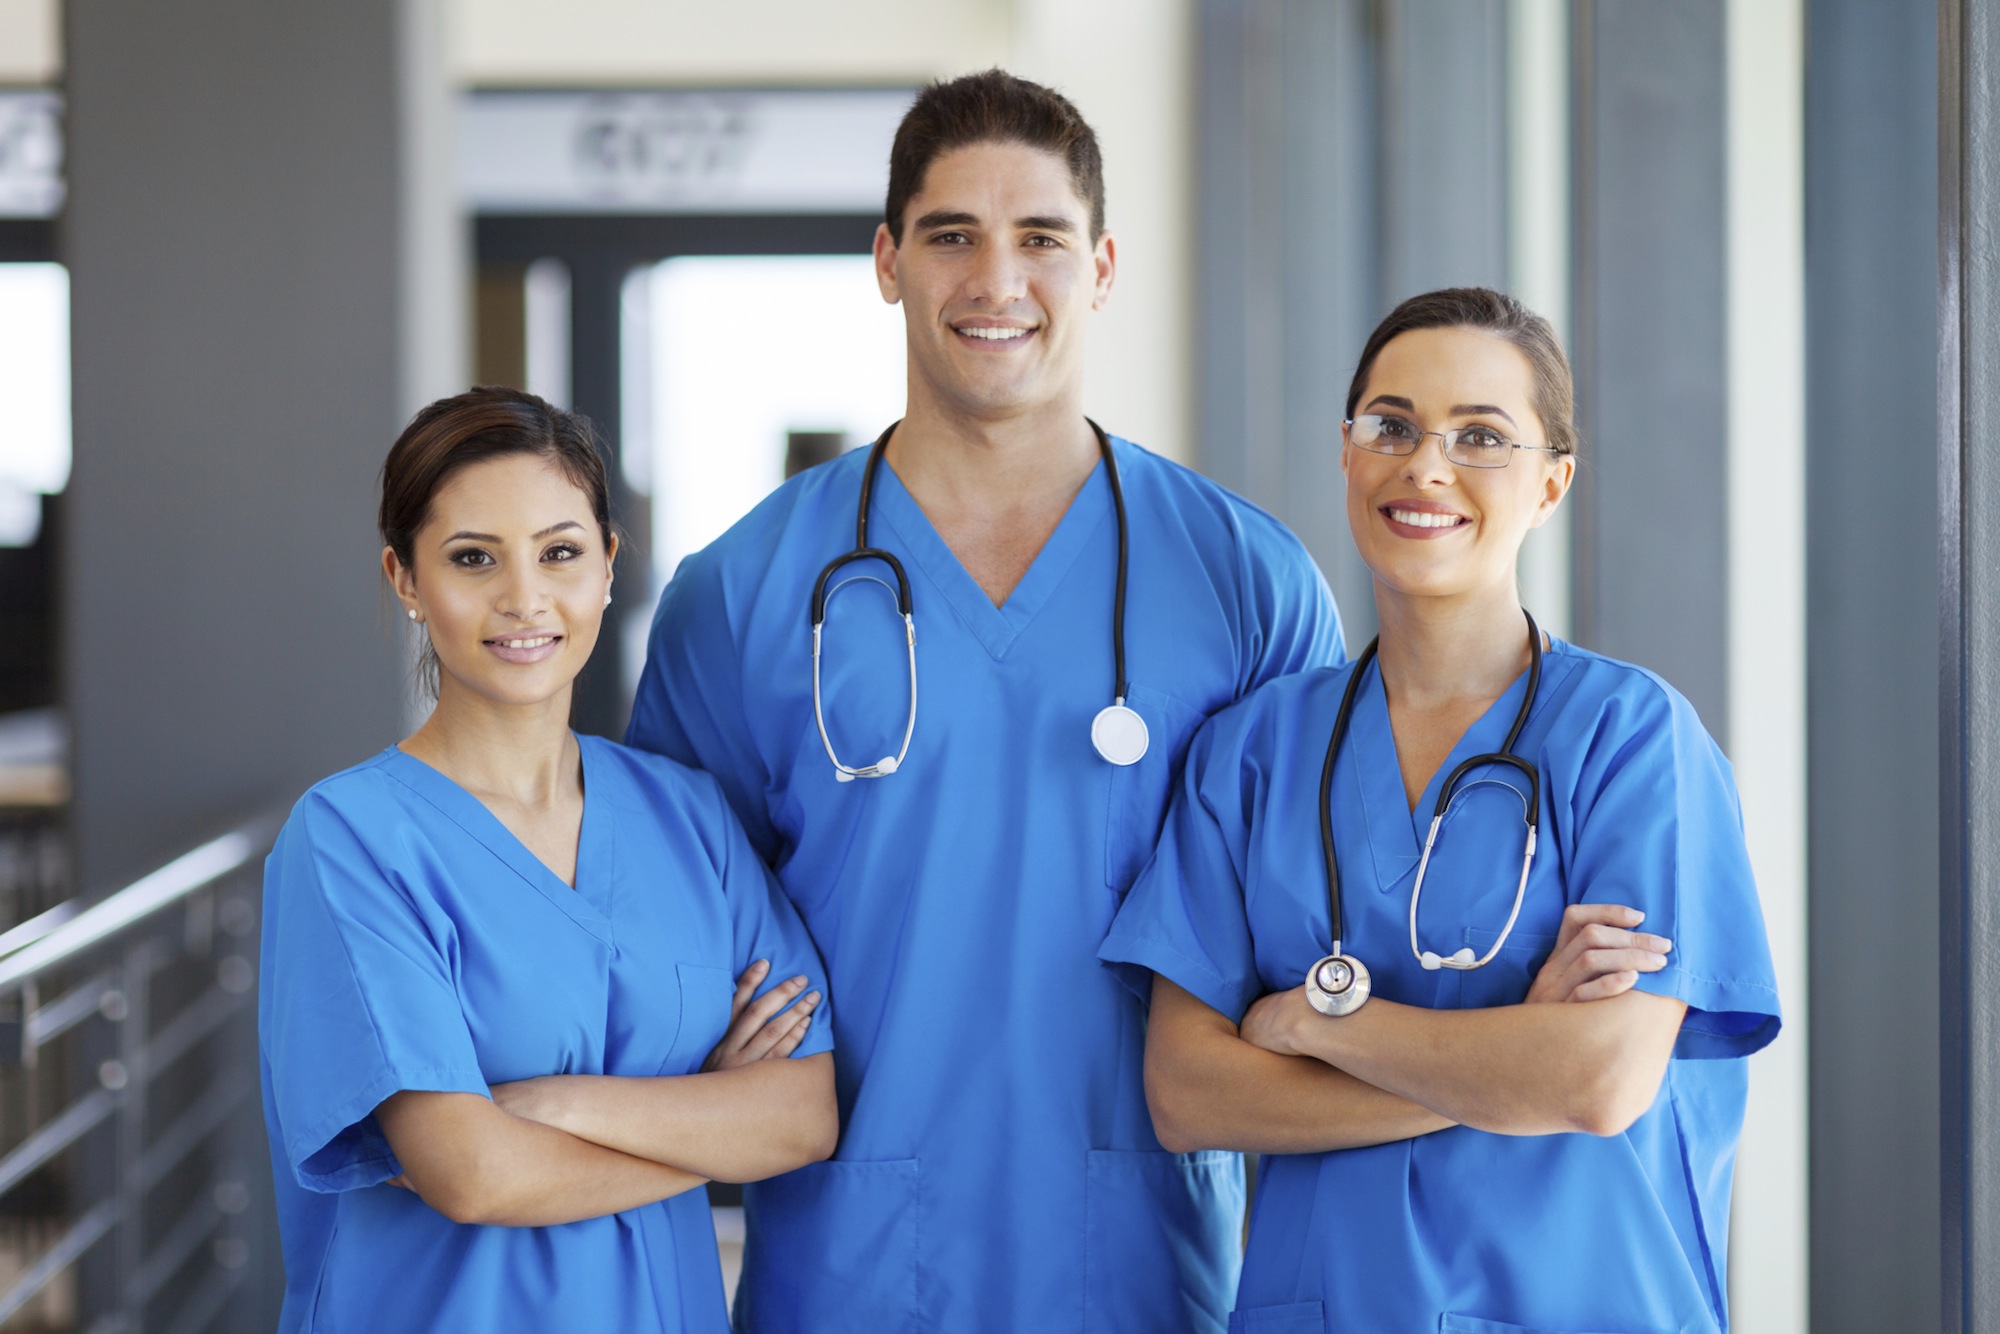 Registered Nurse (RN) Salary and Education Guide